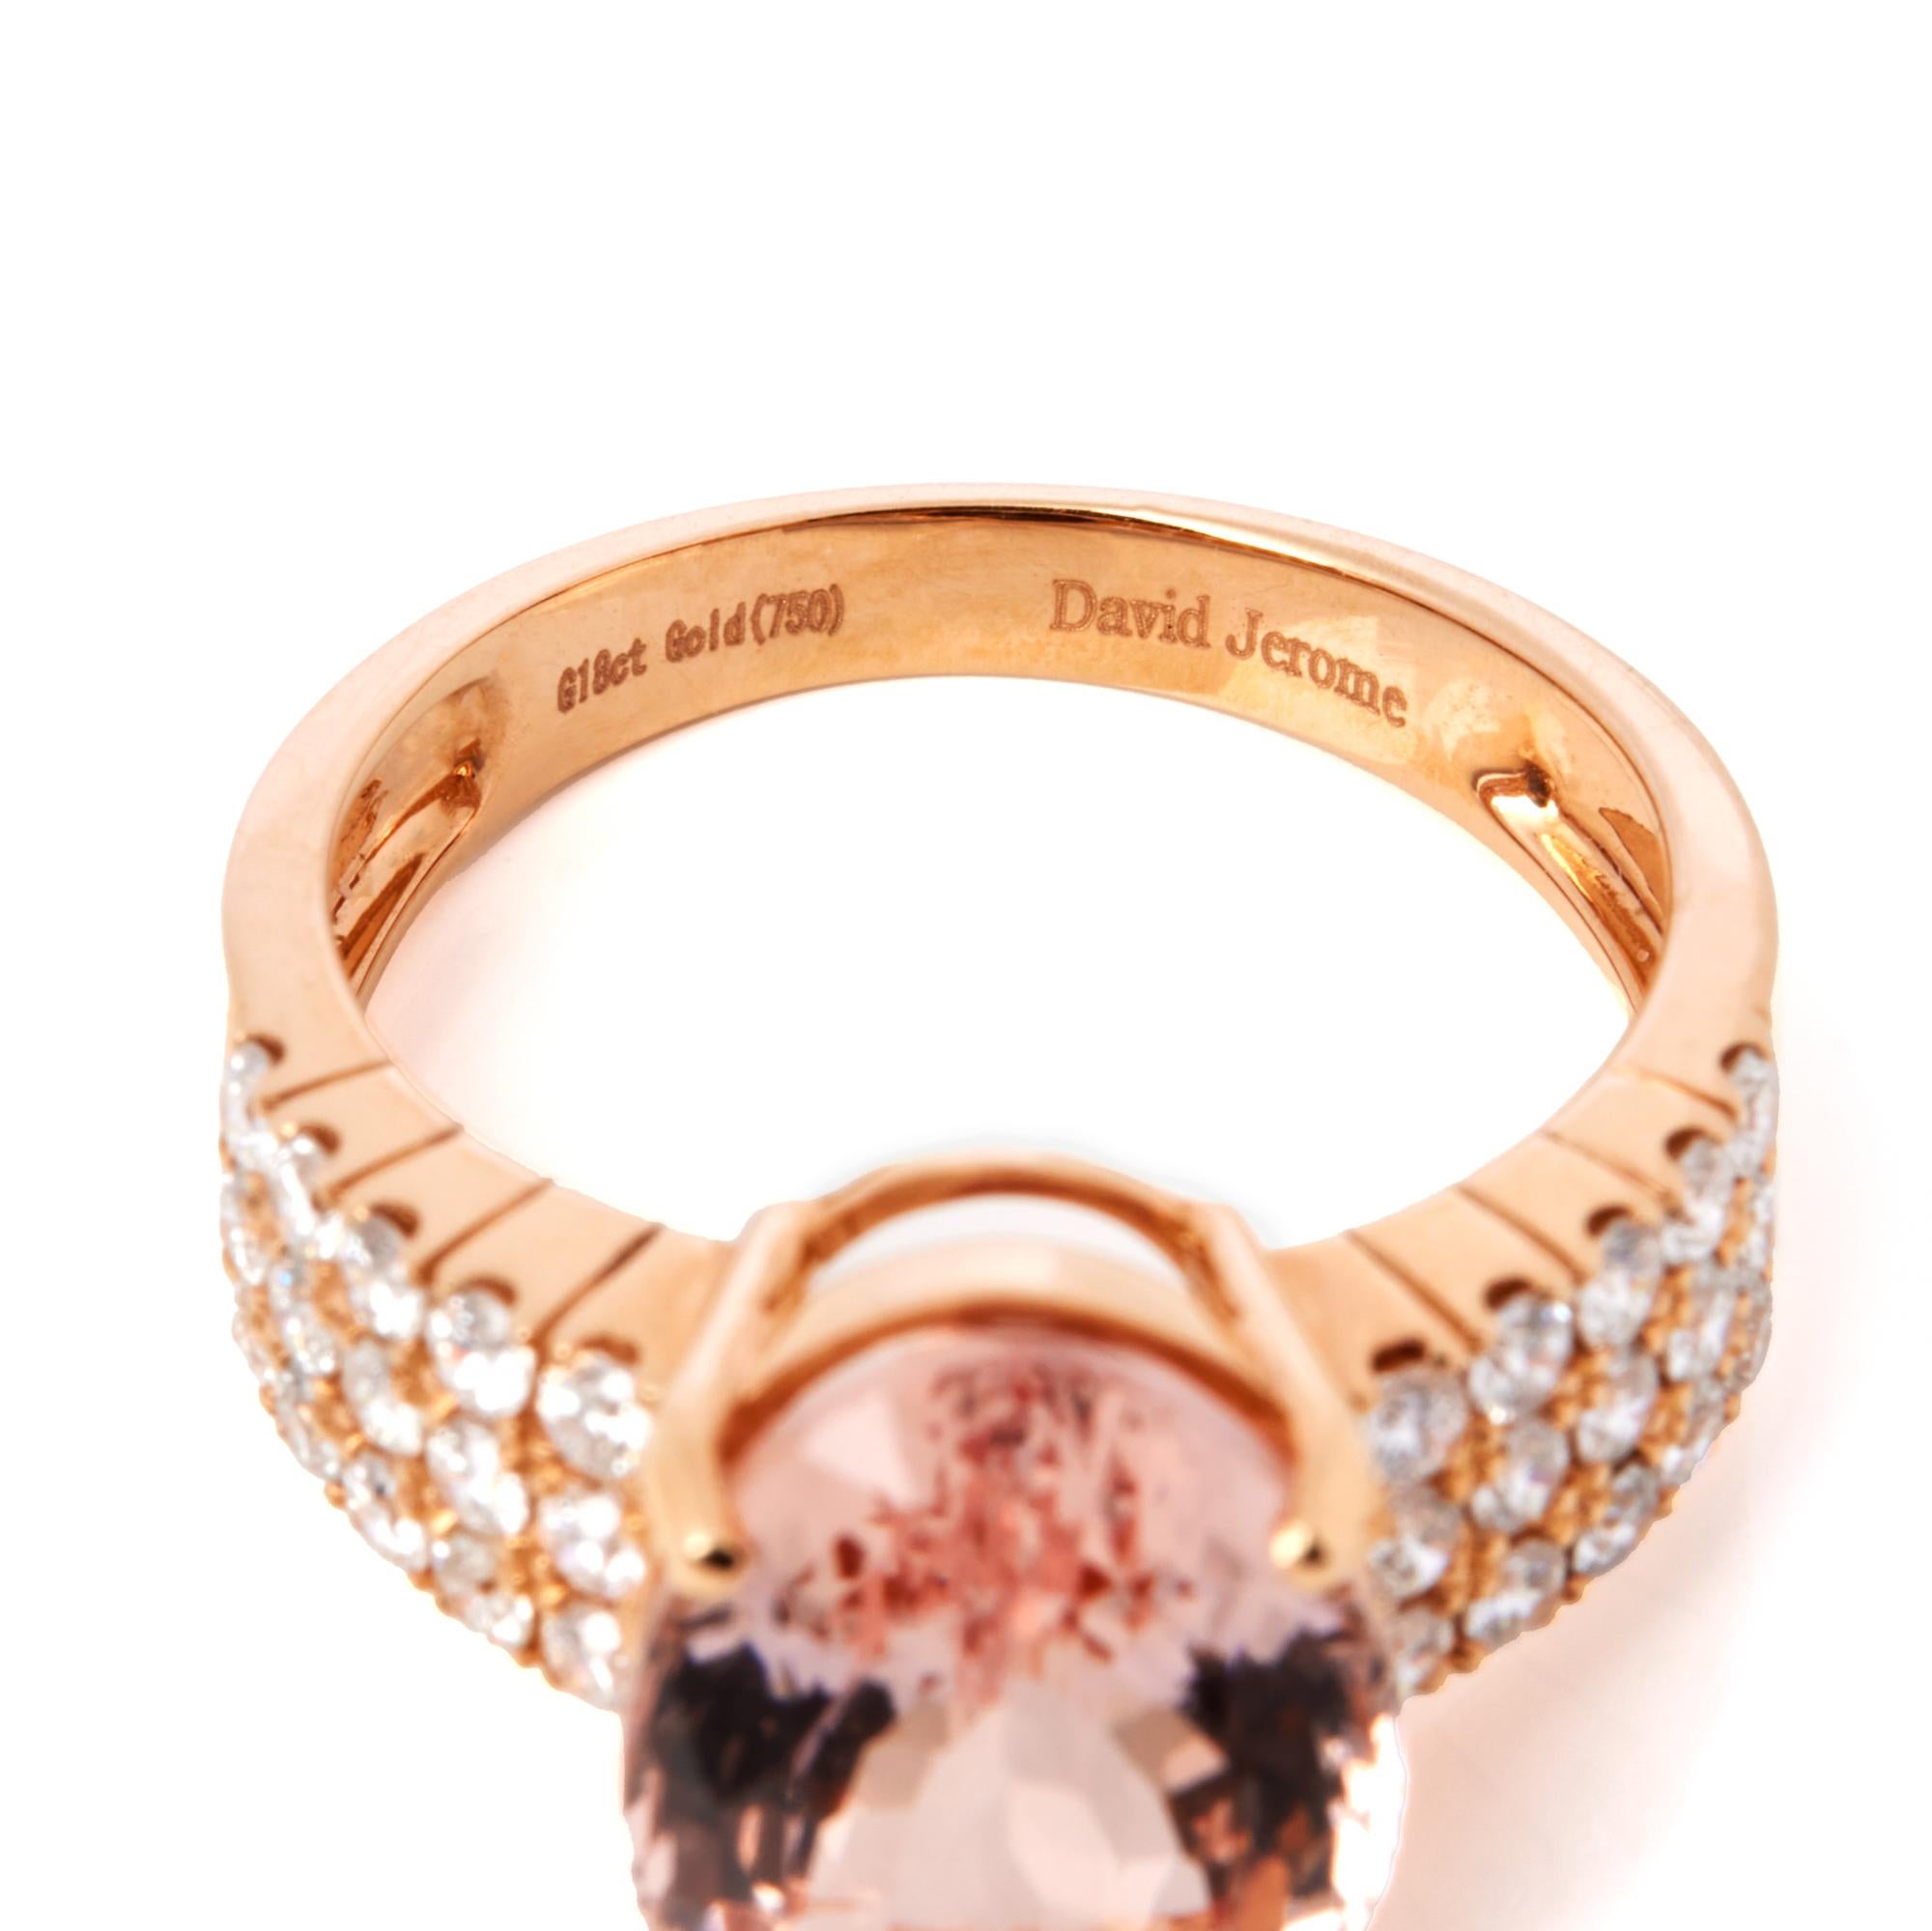 David Jerome Certified 5.41ct Oval Cut Morganite and Diamond Ring In New Condition For Sale In Bishop's Stortford, Hertfordshire